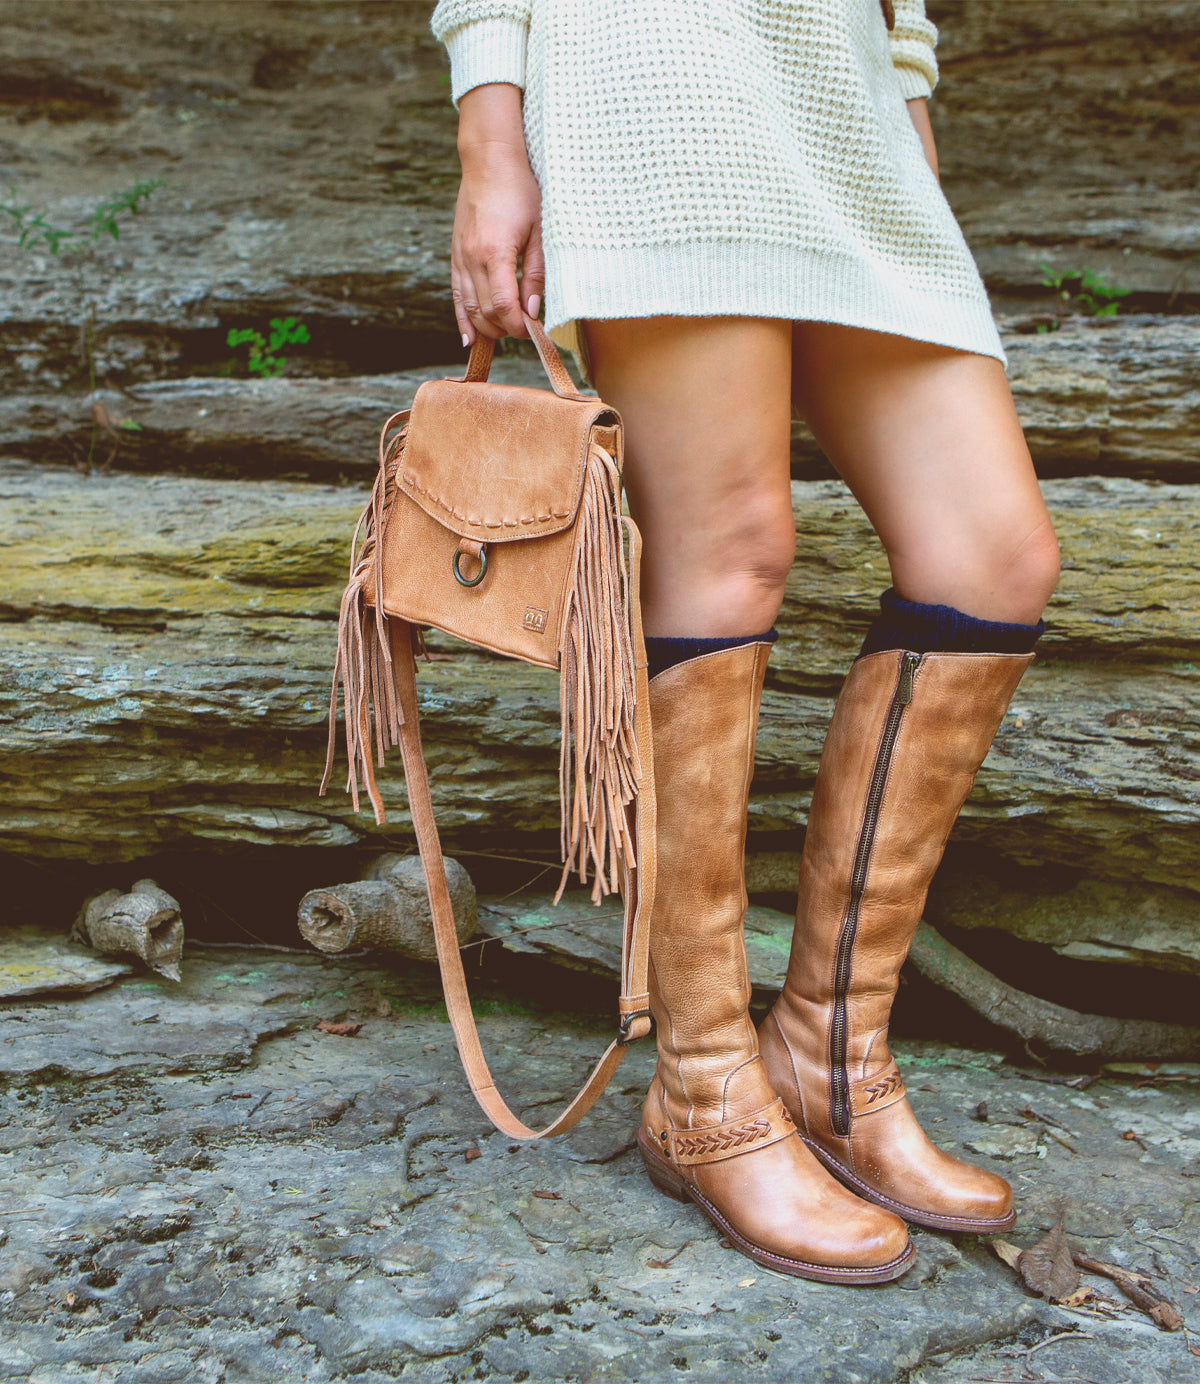 A woman wearing tan boots, a white sweater, and a Bed Stu Hidden adjustable compact leather crossbody bag.